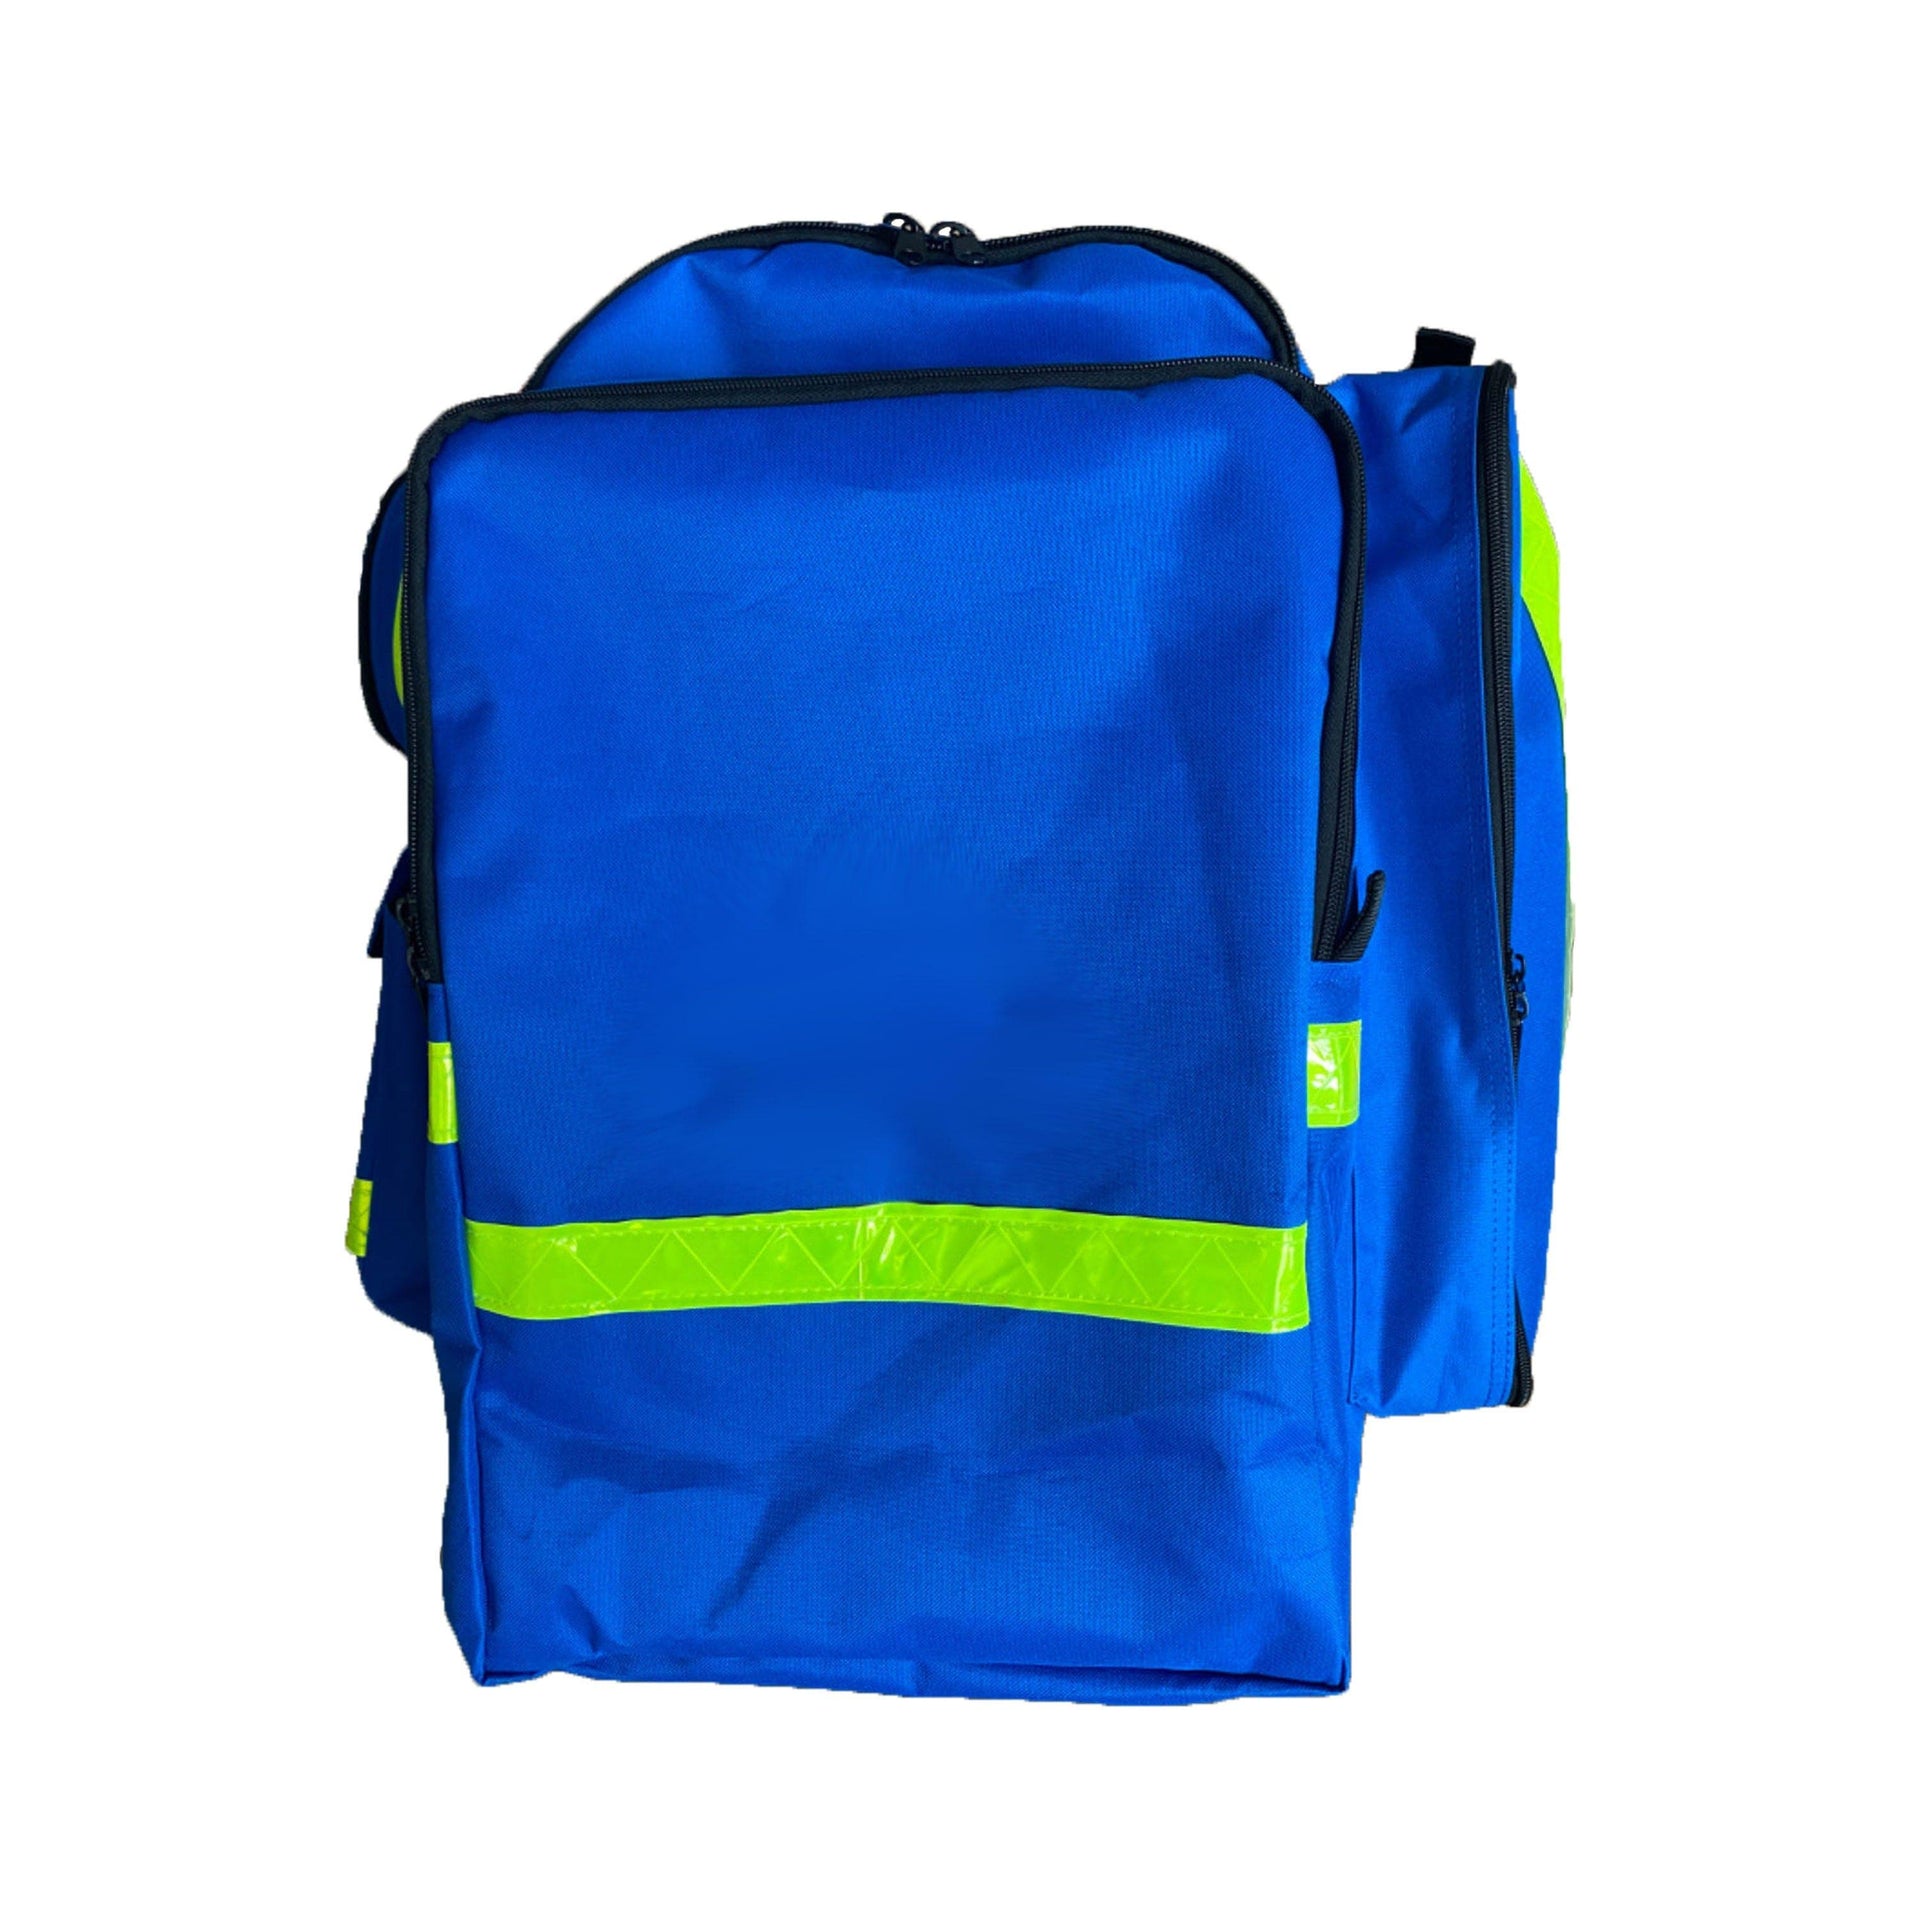 Paramedic Shop Add-Tech Pty Ltd Pouch Royal Blue Deluxe Resuscitation Backpack - BAG ONLY